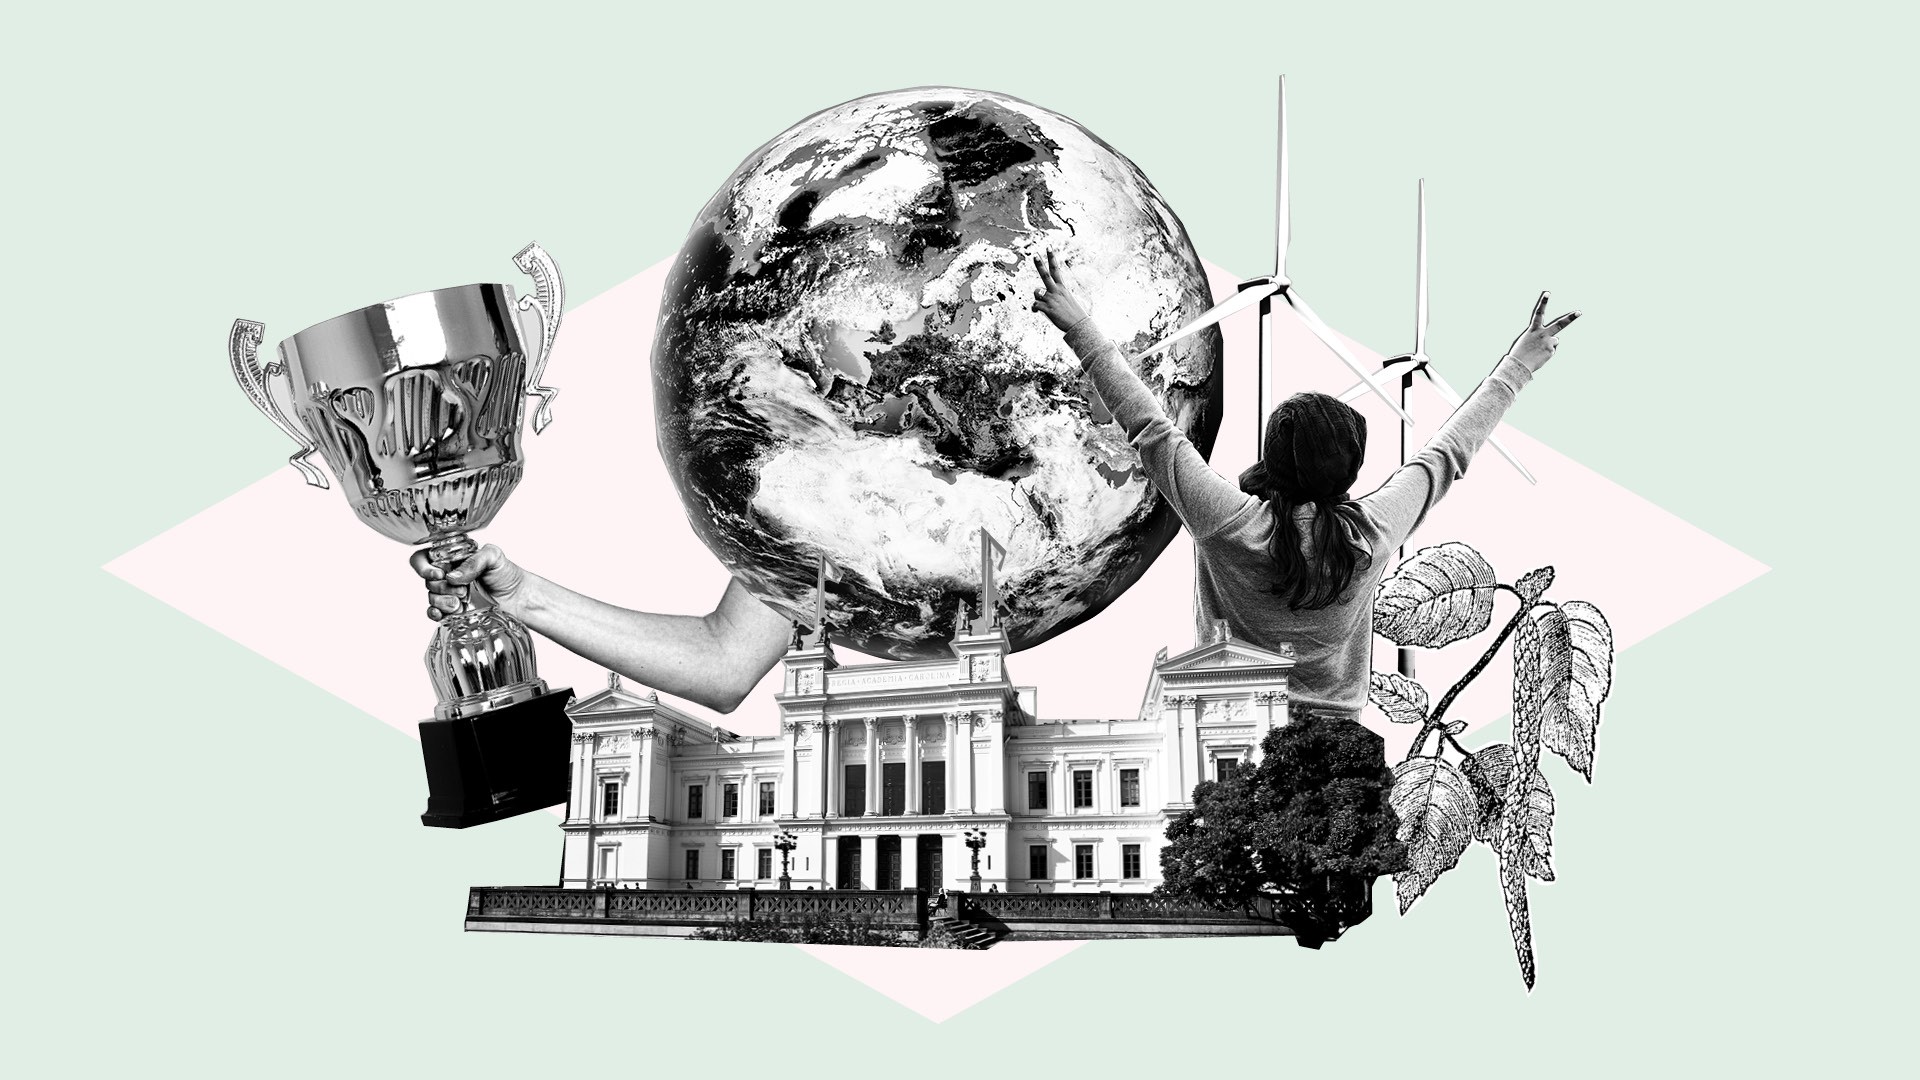 Elements of university building, globe, prize cup, windmill, winning person etc. Illustration.